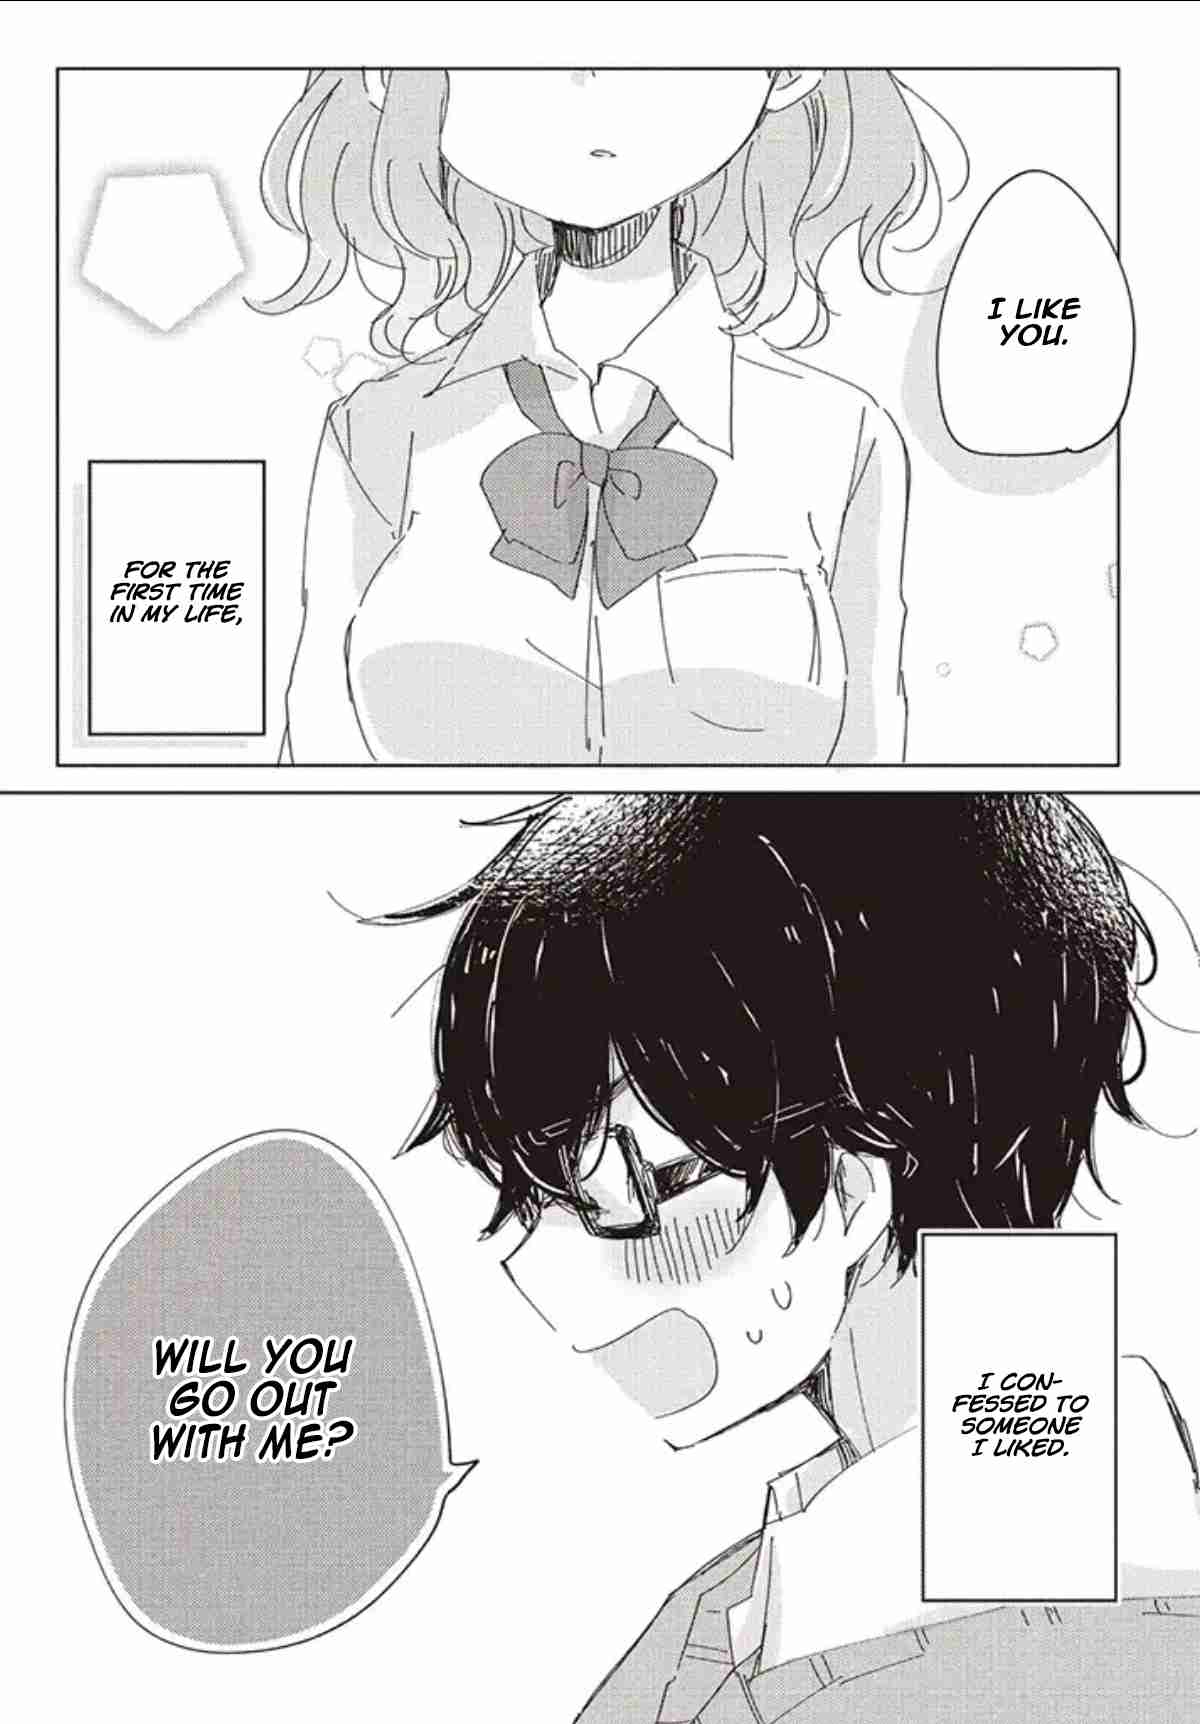 It's Not Meguro san's First Time Vol. 1 Ch. 1